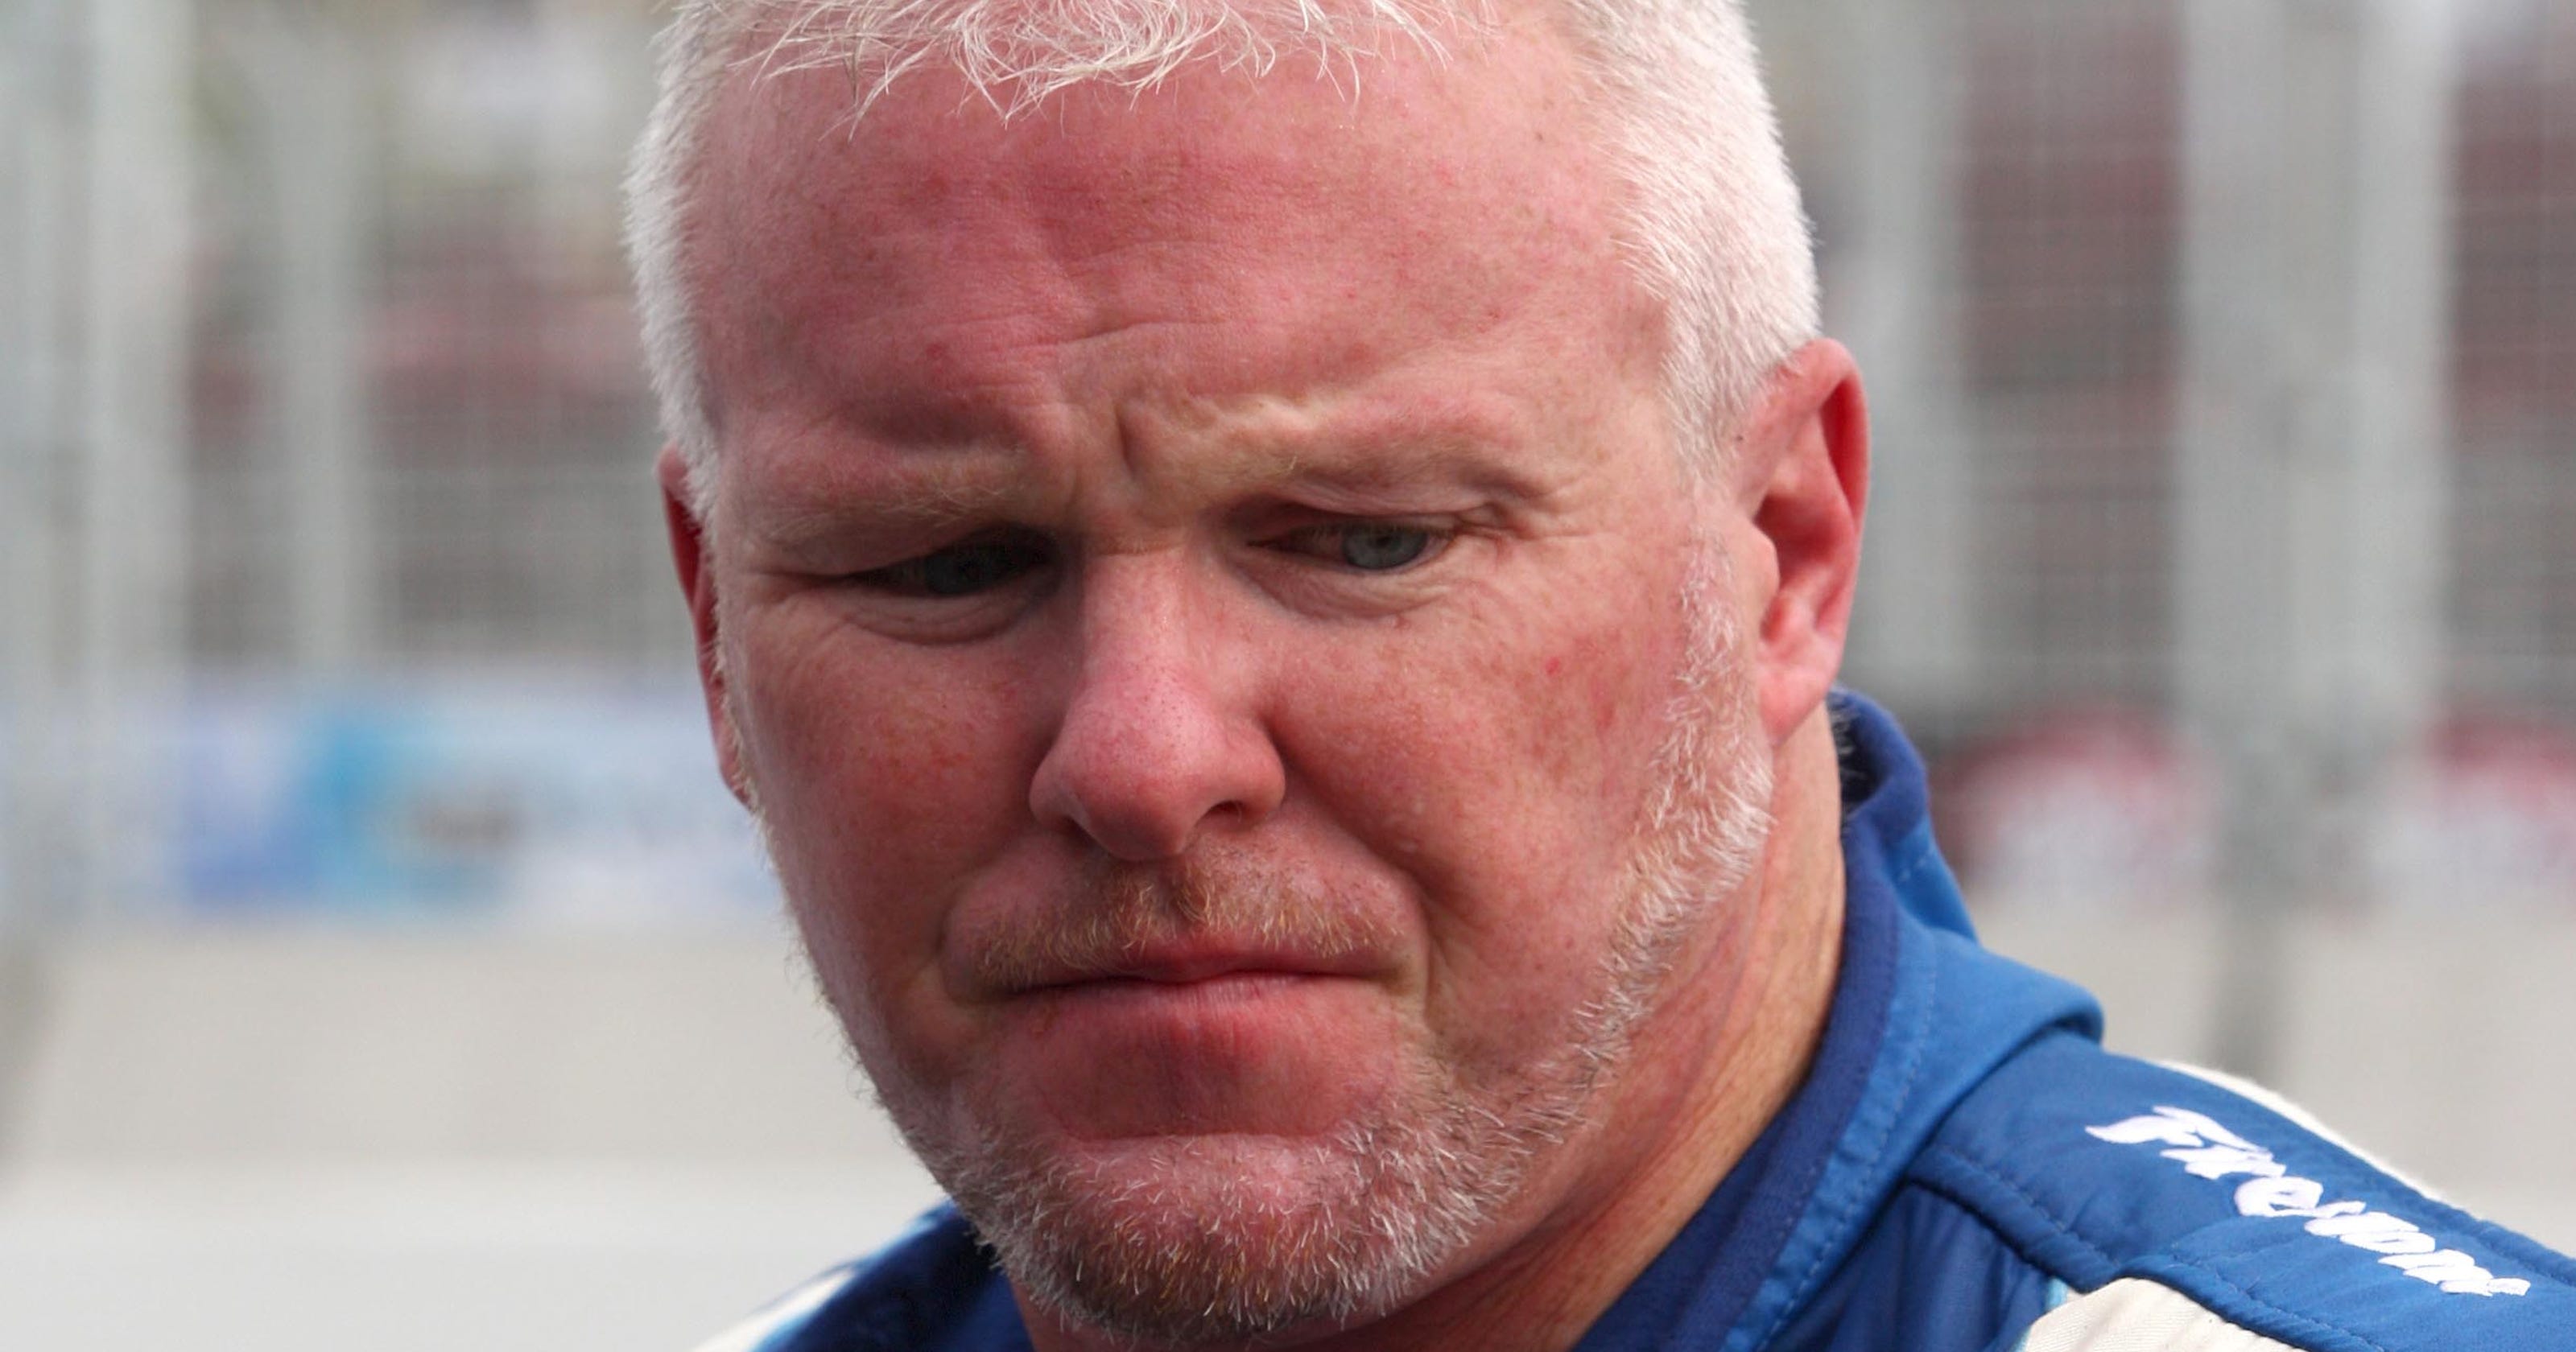 NBC says Paul Tracy's Facebook account was hacked, renews his contract for 2019